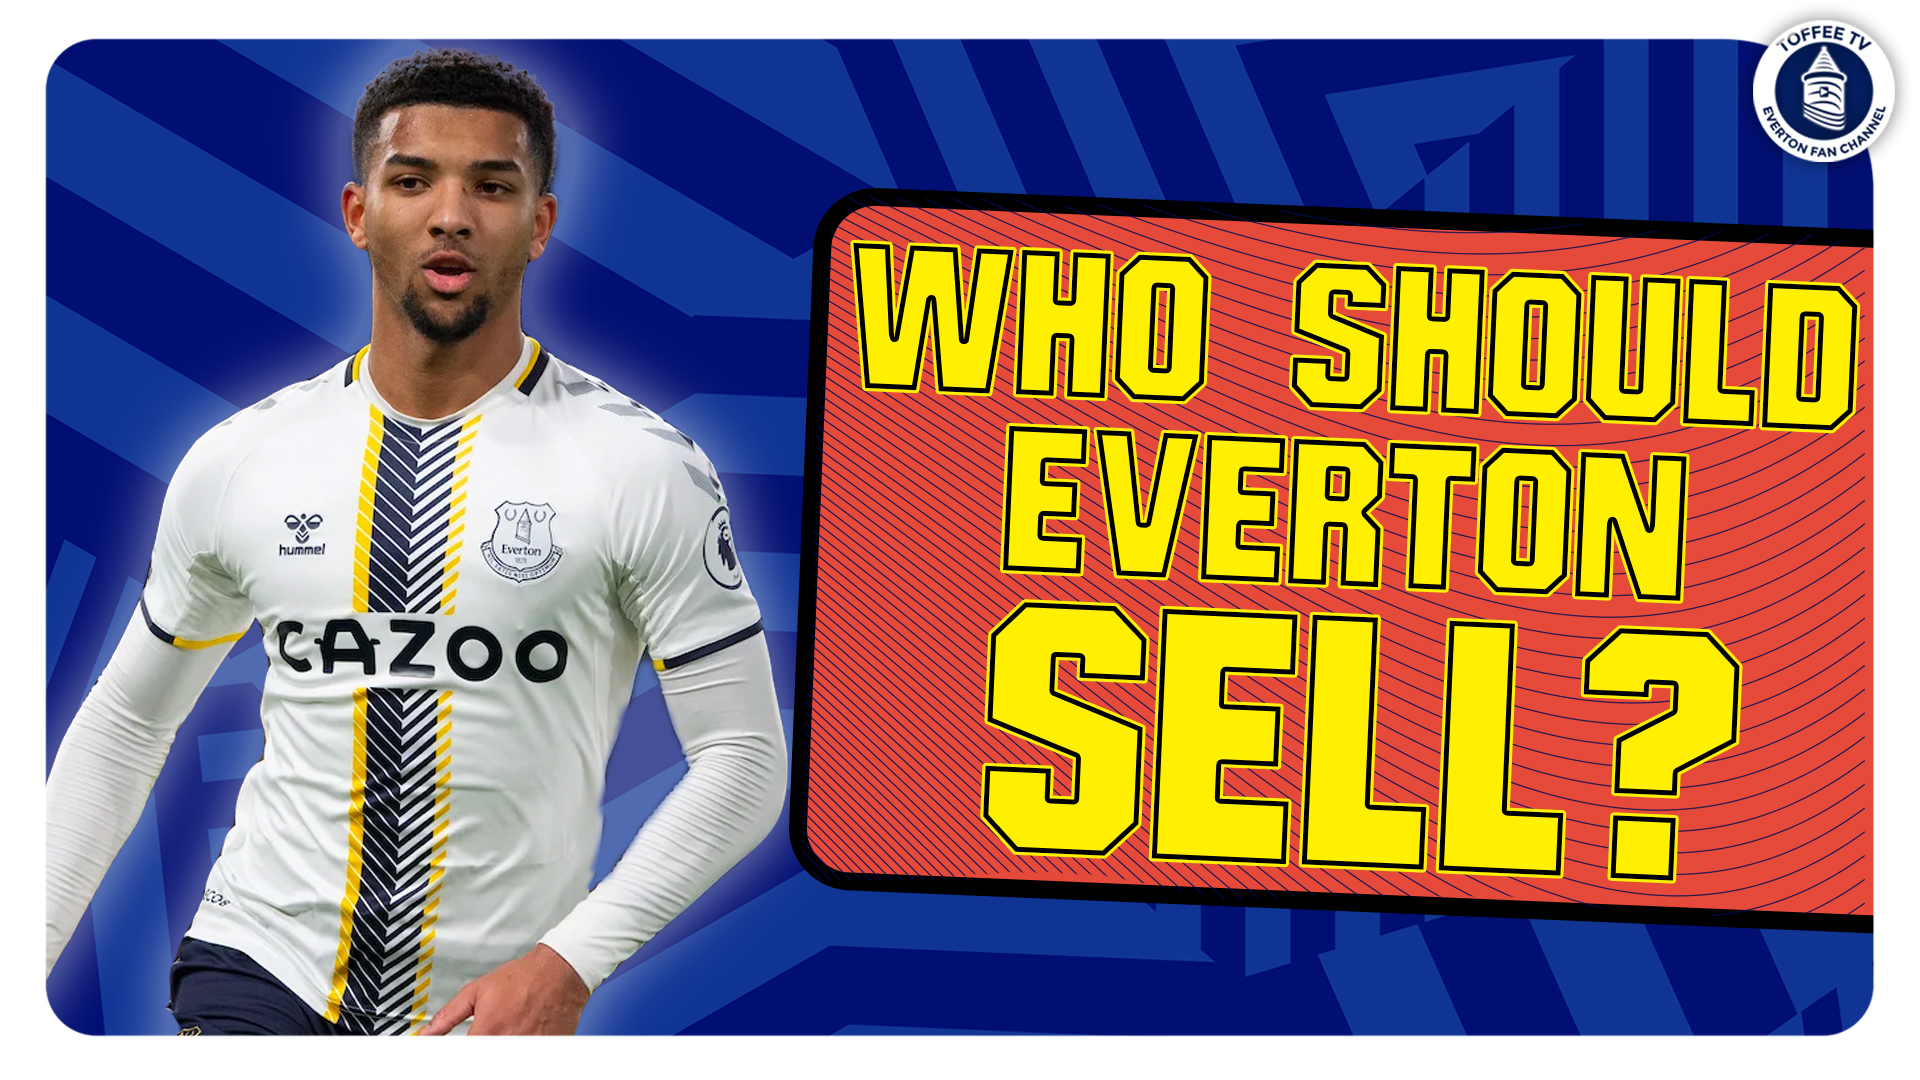 Featured image for “Who Should Everton Sell?”